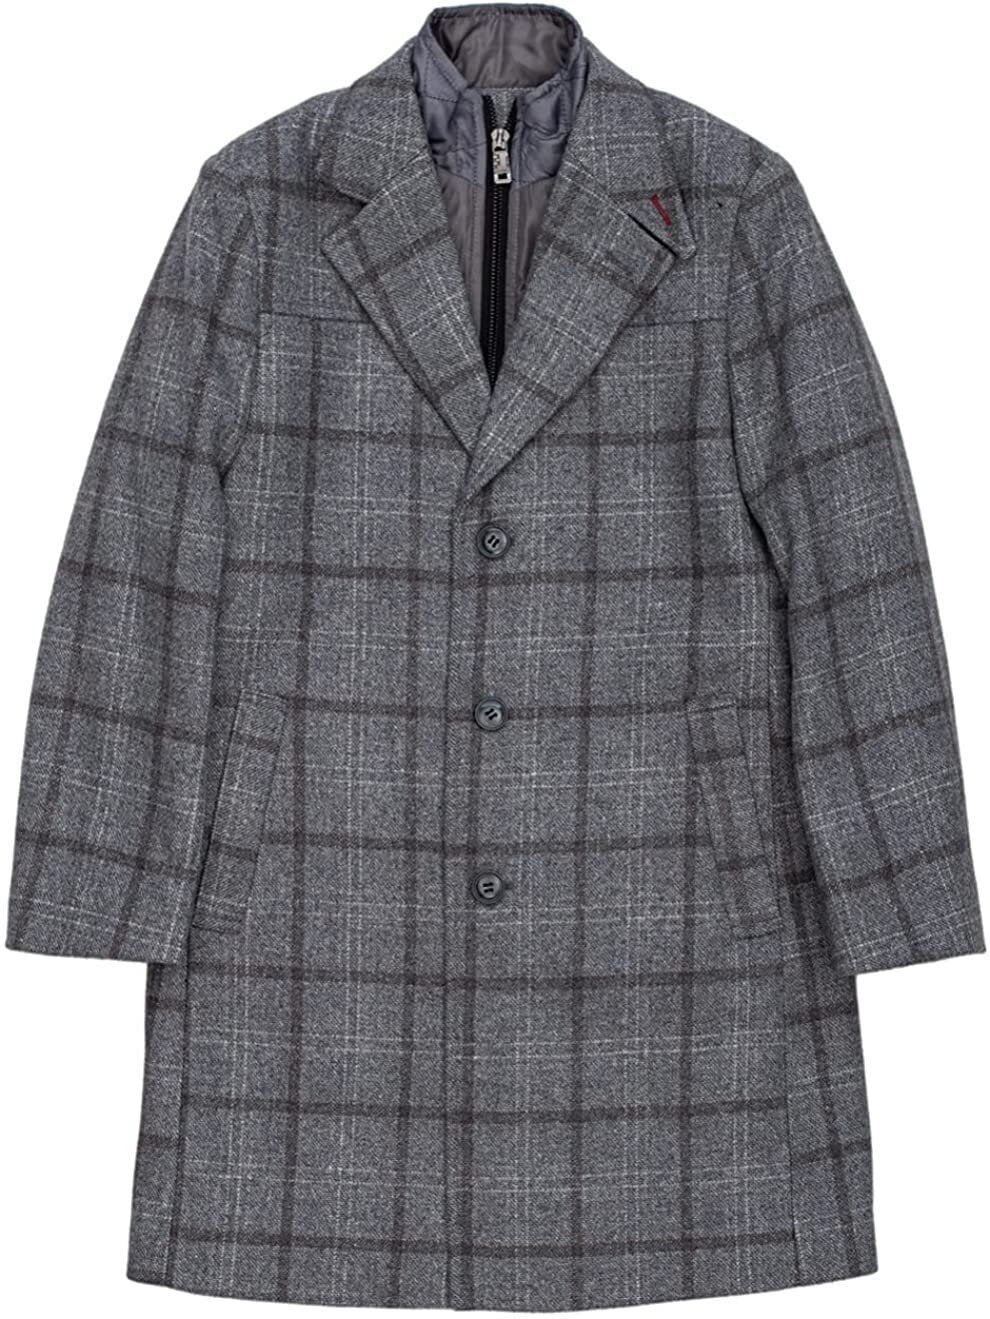 Isaac Mizrahi Boy's 2-20 Single Breasted Quilt Lined Wool-Blend Overcoat with Bib